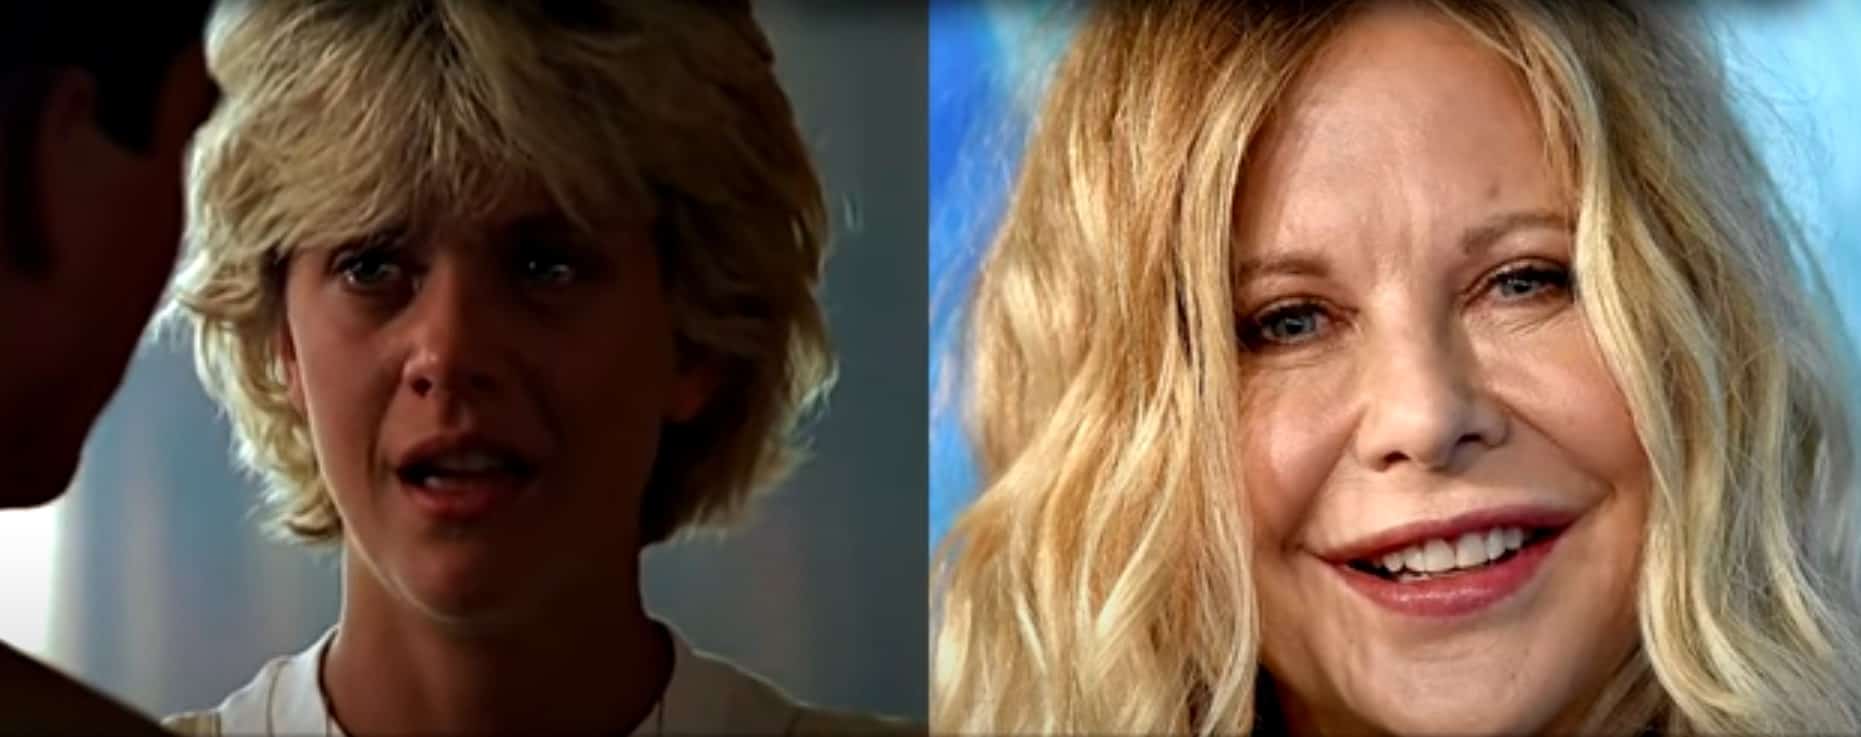 top gun actresses then and now